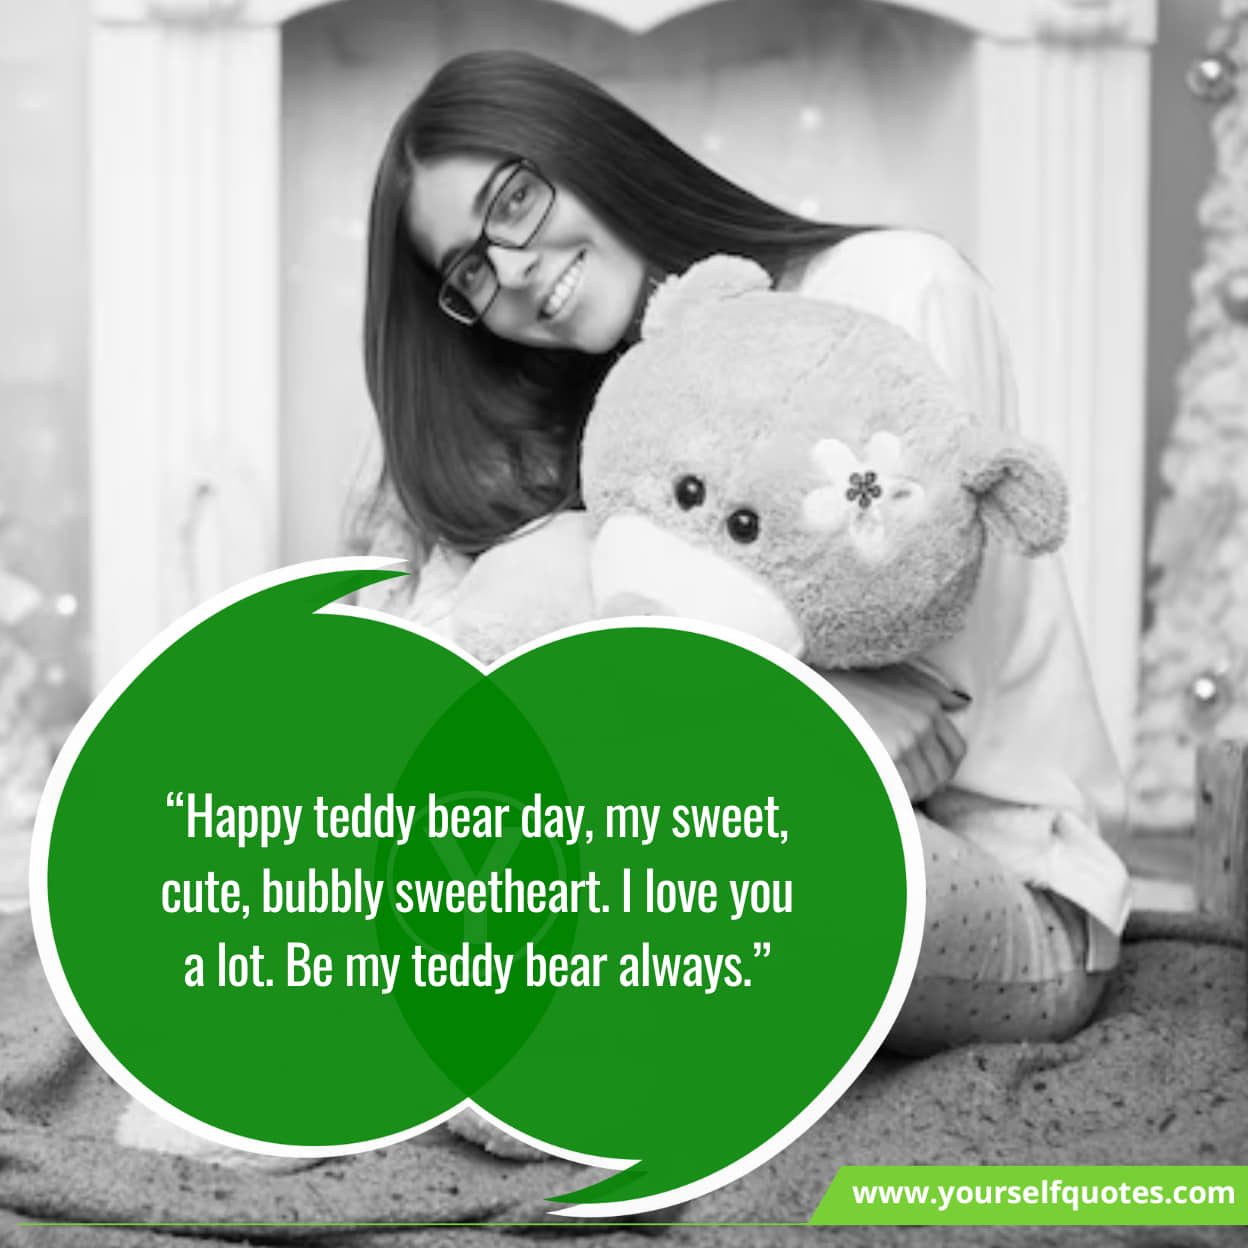 Expressing affection on Teddy Day